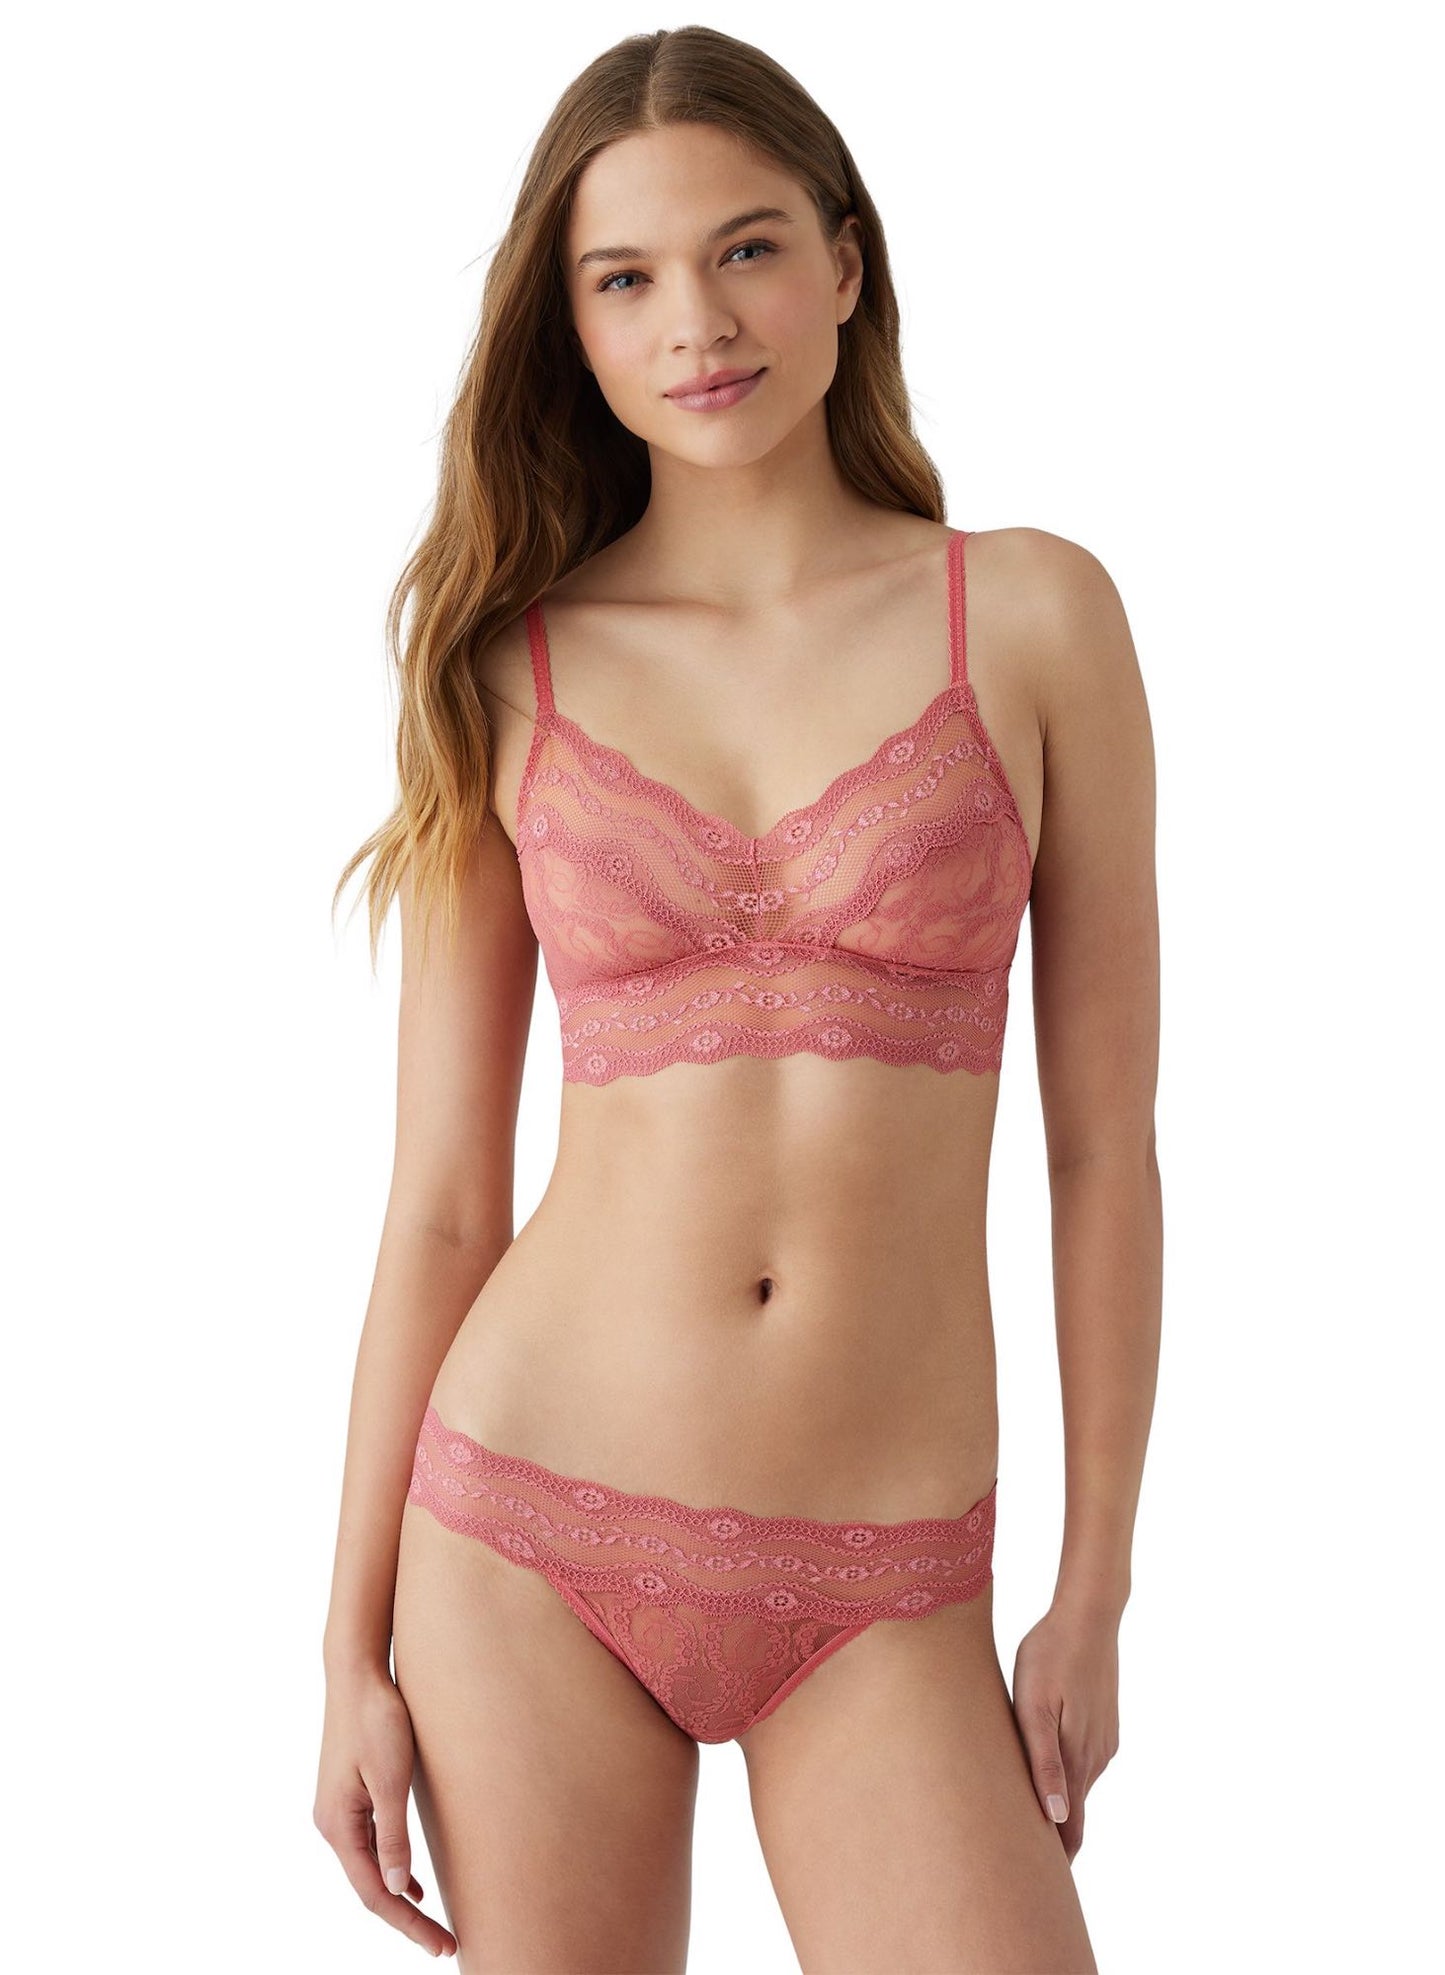 Lace Kiss bralette - early fall color